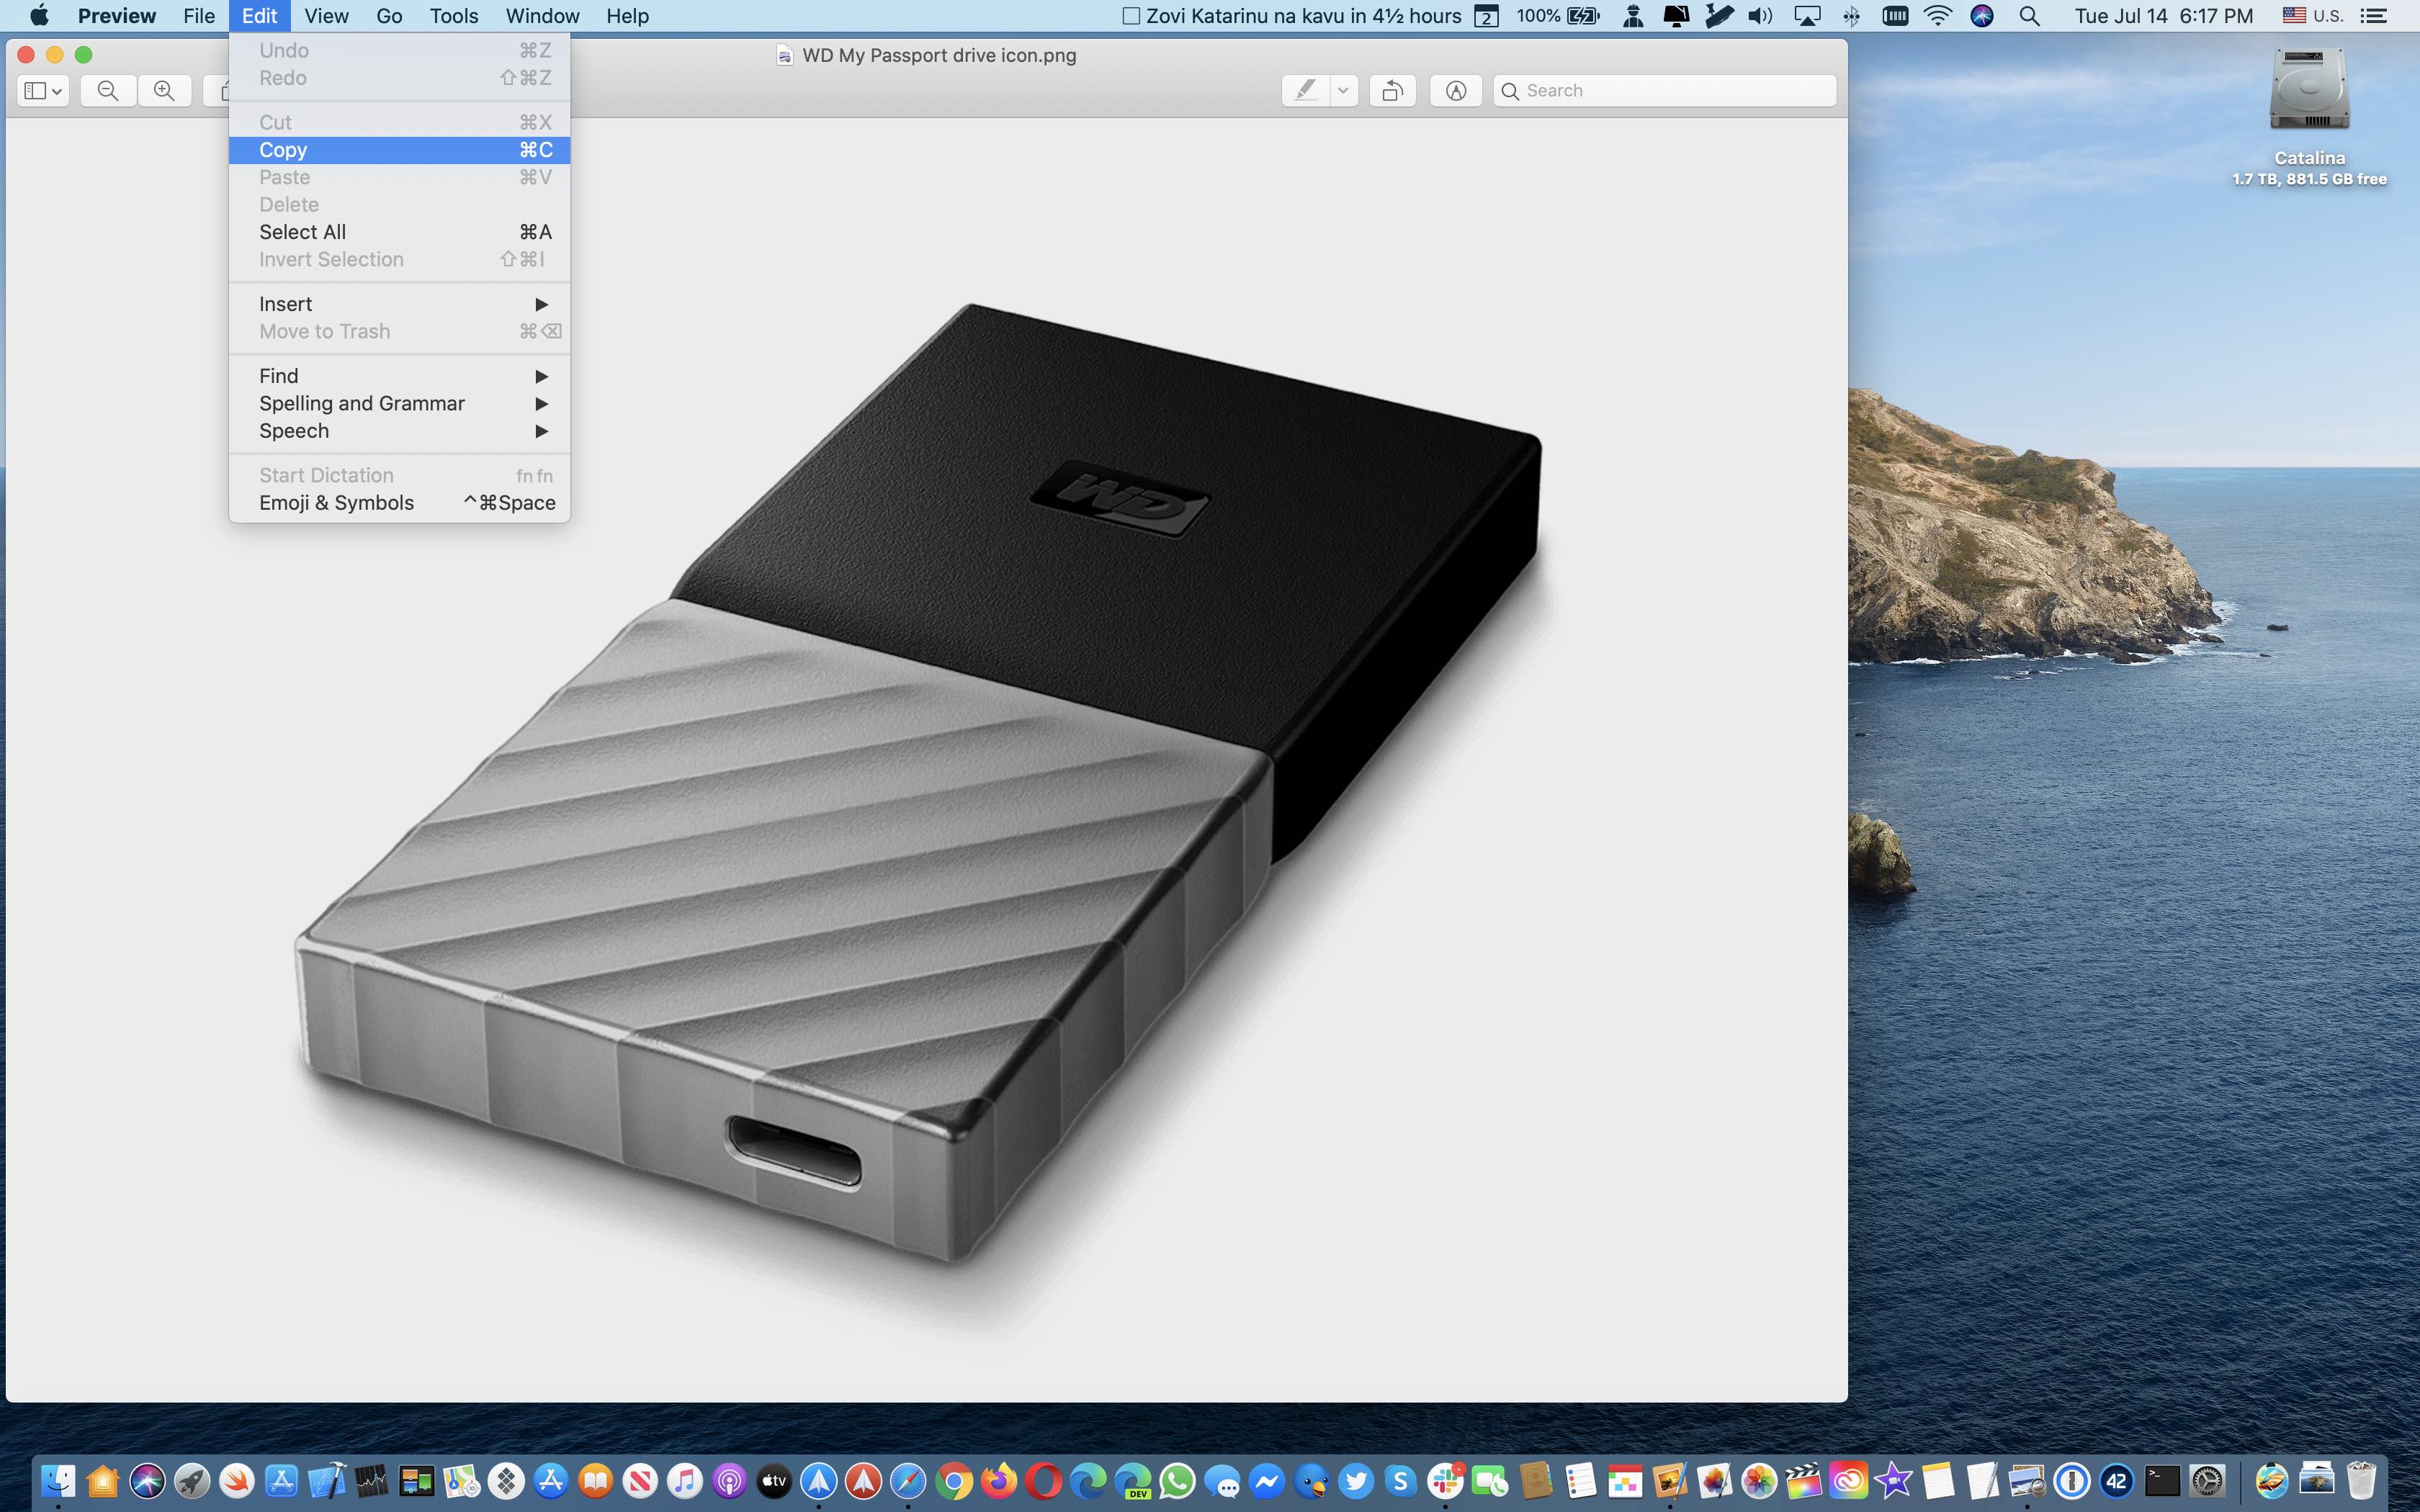 How To Customize Mac Drive Icons For Connected Storage Devices